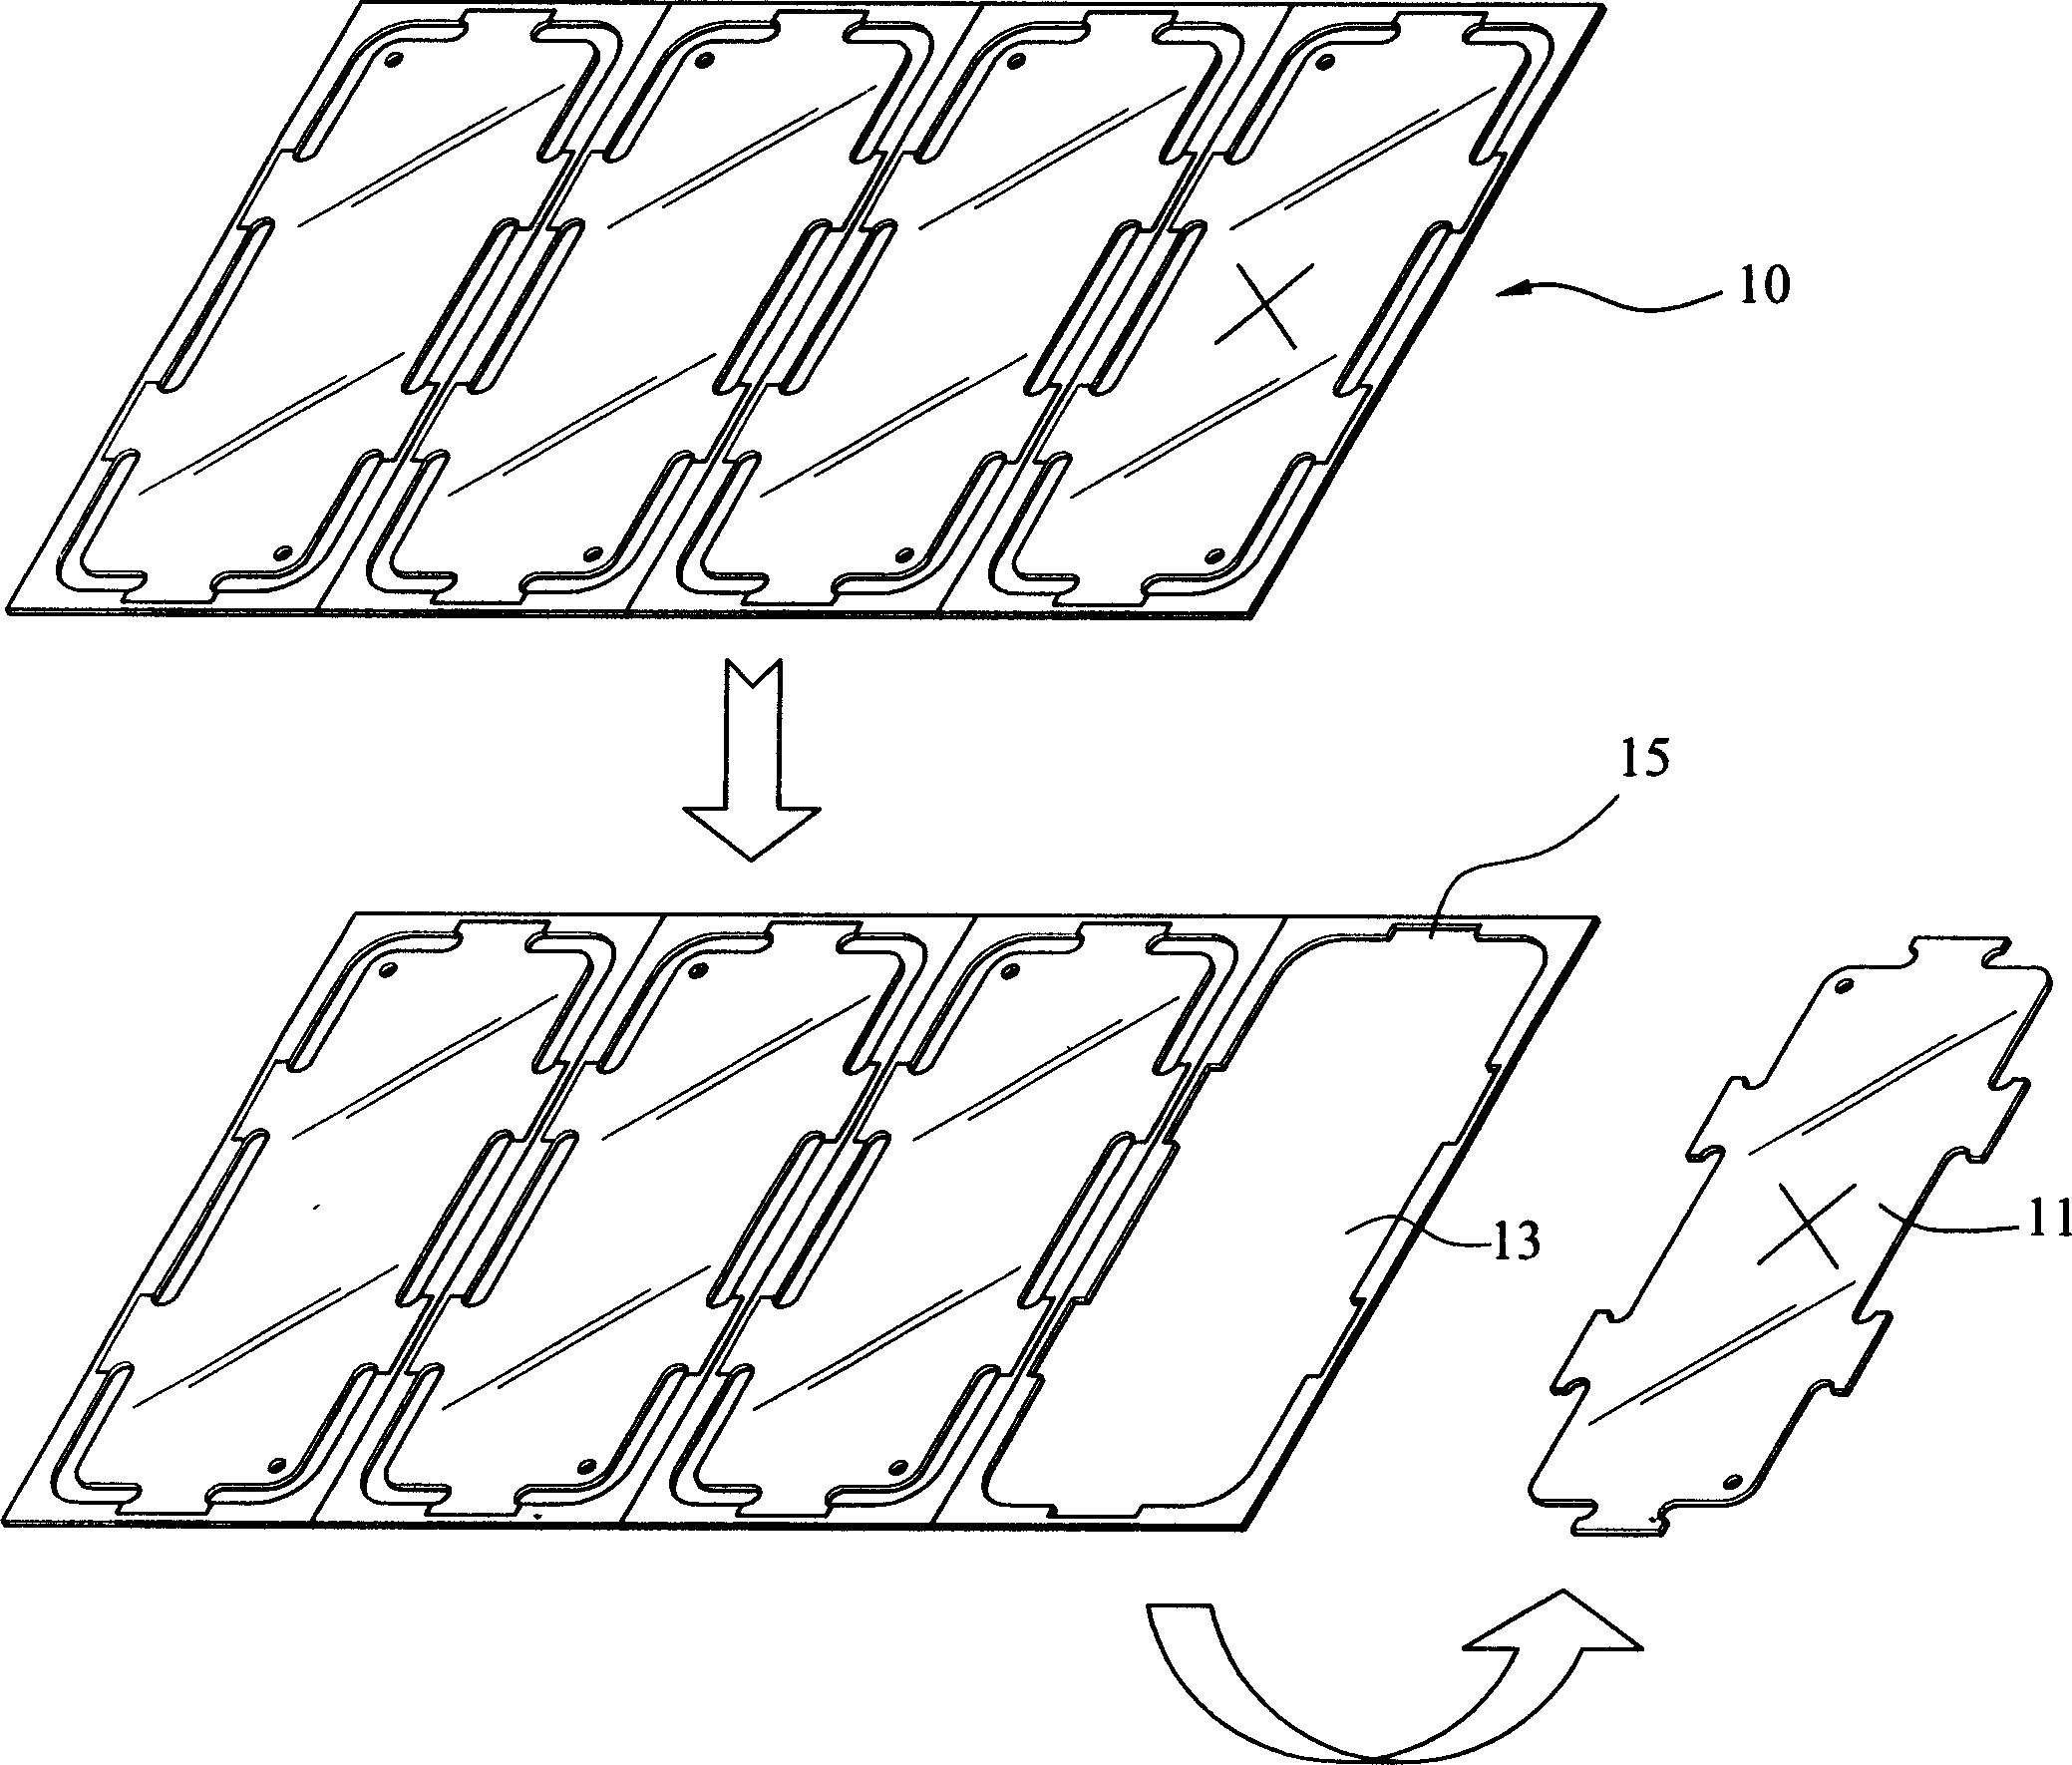 Method for replacing and resetting imperfect multi-piece printed circuit board